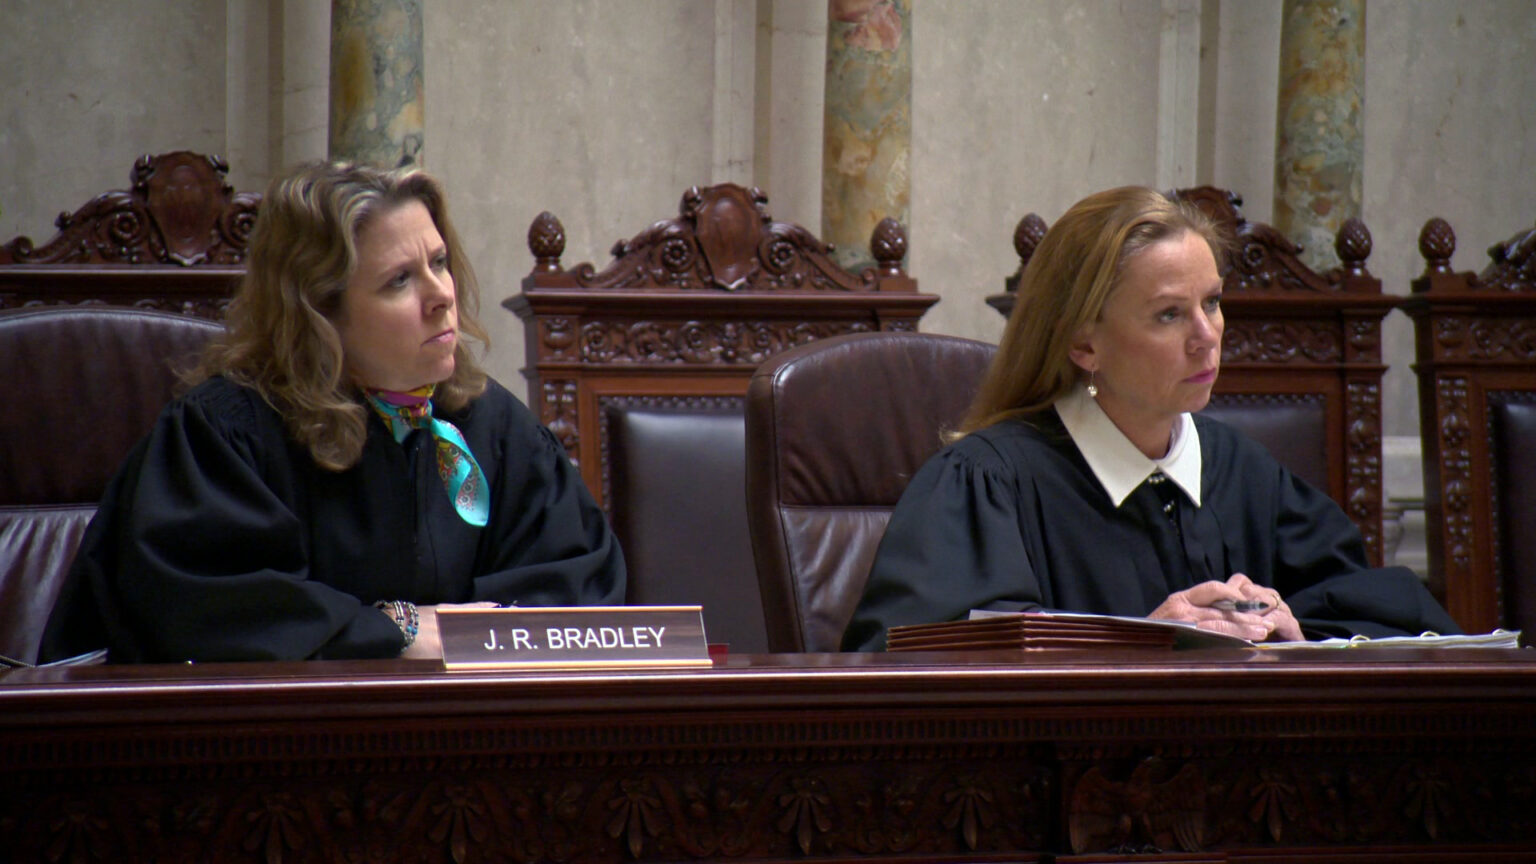 Rebecca Bradley and Annette Ziegler sit in high-backed leather chairs at a judicial bench with a nameplate reading J.R. Bradley and an expanding file folder on its surface, with a row of empty high-backed wood and leather chairs behind them in a room with marble masonry.